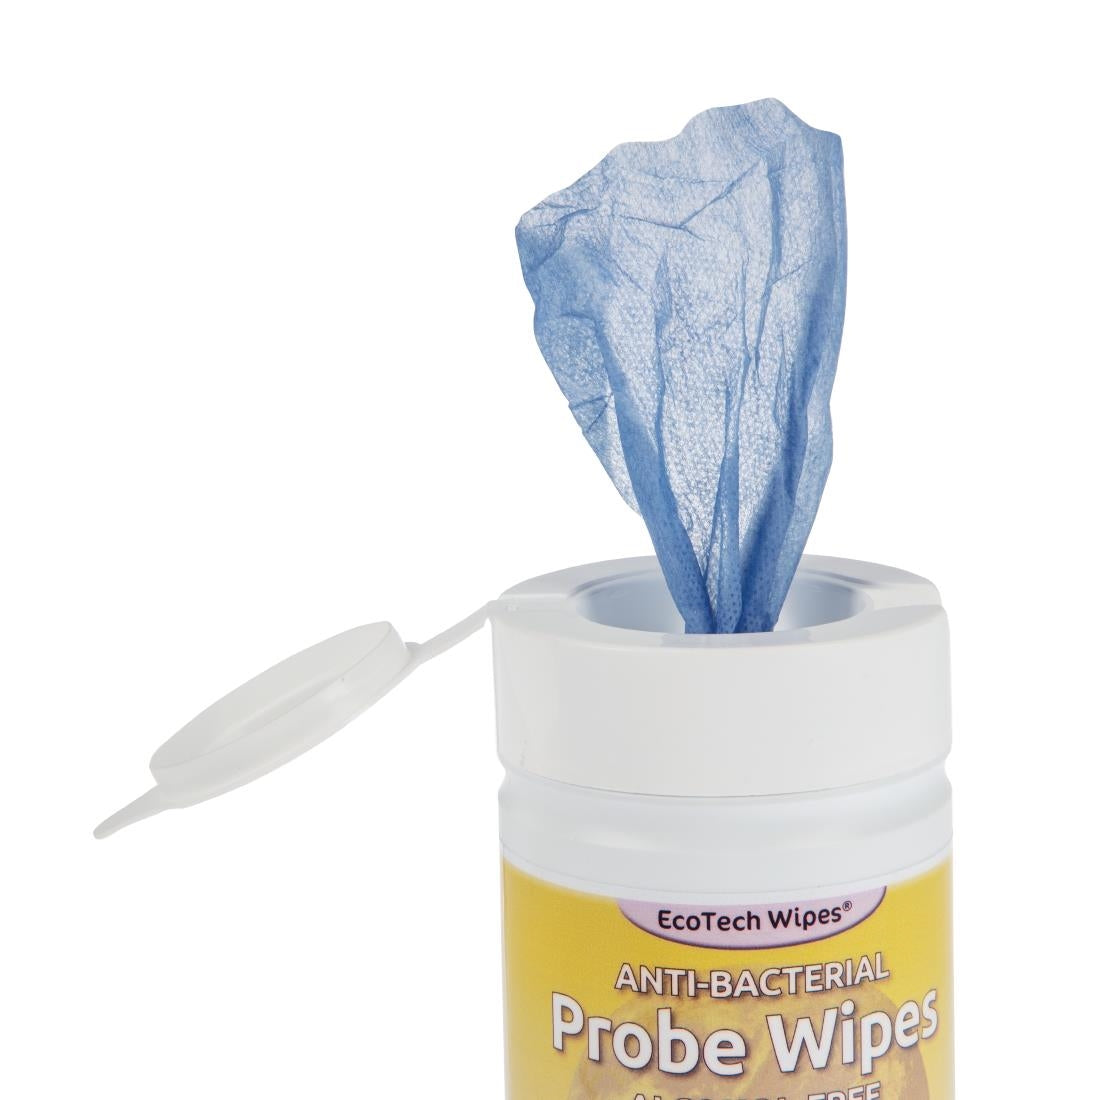 Alcohol-Free Quat-Free Food Probe Wipes (Pack of 200) JD Catering Equipment Solutions Ltd